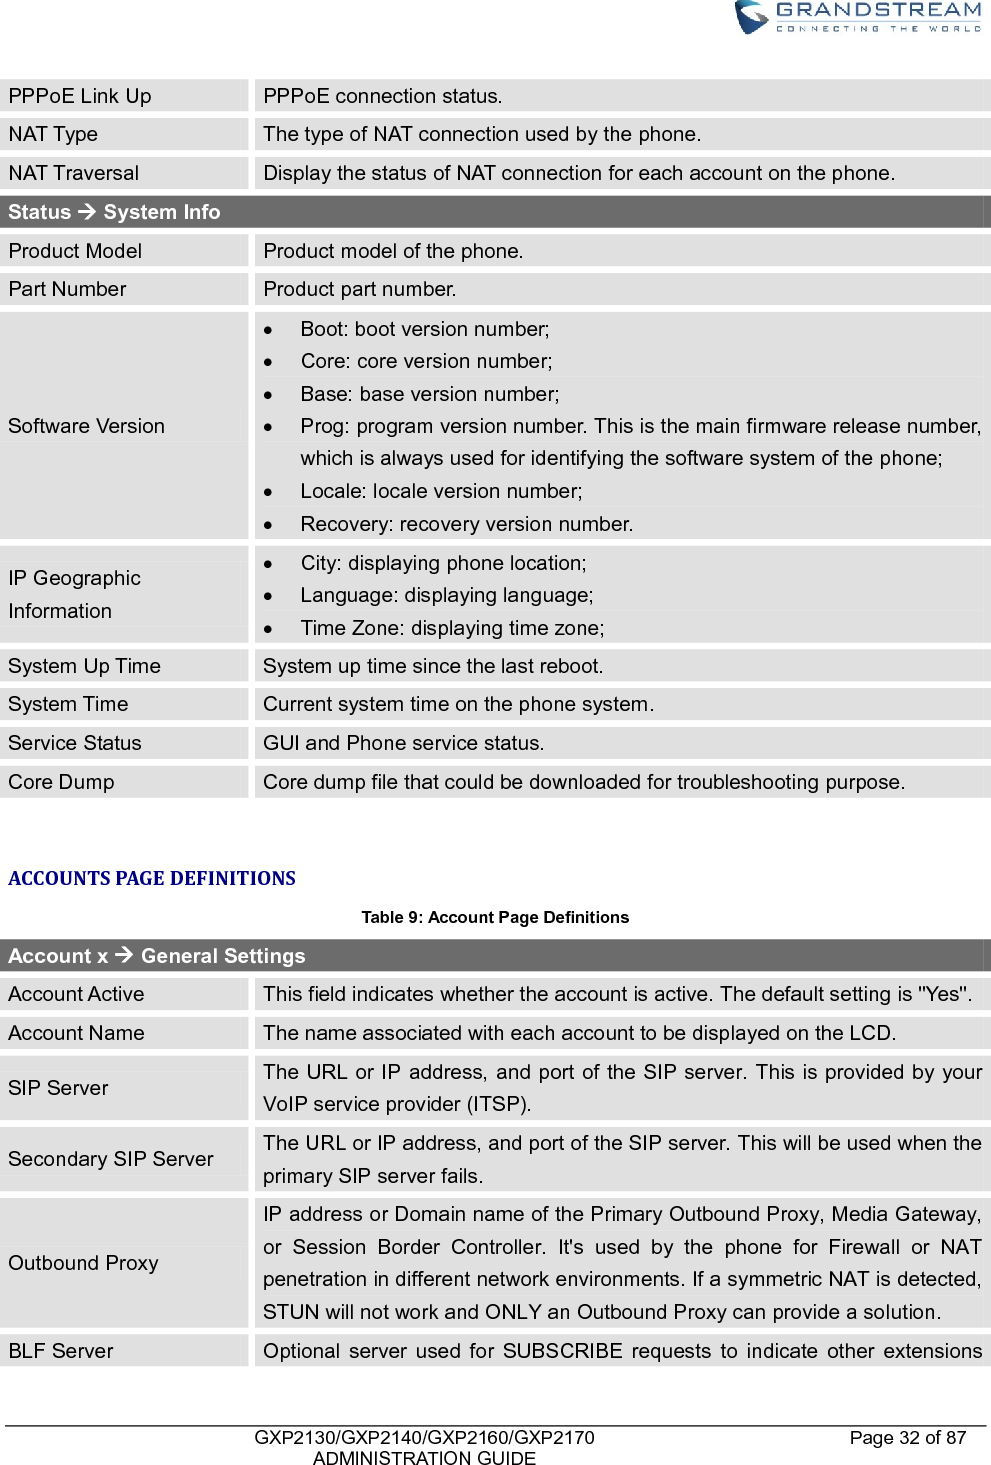    GXP2130/GXP2140/GXP2160/GXP2170   ADMINISTRATION GUIDE Page 32 of 87     PPPoE Link Up PPPoE connection status. NAT Type The type of NAT connection used by the phone. NAT Traversal Display the status of NAT connection for each account on the phone. Status  System Info Product Model Product model of the phone. Part Number Product part number. Software Version   Boot: boot version number;   Core: core version number;   Base: base version number;   Prog: program version number. This is the main firmware release number, which is always used for identifying the software system of the phone;   Locale: locale version number;   Recovery: recovery version number.   IP Geographic Information   City: displaying phone location;   Language: displaying language;   Time Zone: displaying time zone; System Up Time System up time since the last reboot. System Time Current system time on the phone system. Service Status GUI and Phone service status. Core Dump Core dump file that could be downloaded for troubleshooting purpose.  ACCOUNTS PAGE DEFINITIONS Table 9: Account Page Definitions Account x  General Settings Account Active This field indicates whether the account is active. The default setting is &quot;Yes&quot;. Account Name The name associated with each account to be displayed on the LCD. SIP Server The URL or IP address, and port of the SIP server. This is provided by your VoIP service provider (ITSP). Secondary SIP Server The URL or IP address, and port of the SIP server. This will be used when the primary SIP server fails. Outbound Proxy IP address or Domain name of the Primary Outbound Proxy, Media Gateway, or  Session  Border  Controller.  It&apos;s  used  by  the  phone  for  Firewall  or  NAT penetration in different network environments. If a symmetric NAT is detected, STUN will not work and ONLY an Outbound Proxy can provide a solution. BLF Server Optional  server  used  for  SUBSCRIBE  requests  to  indicate  other  extensions 